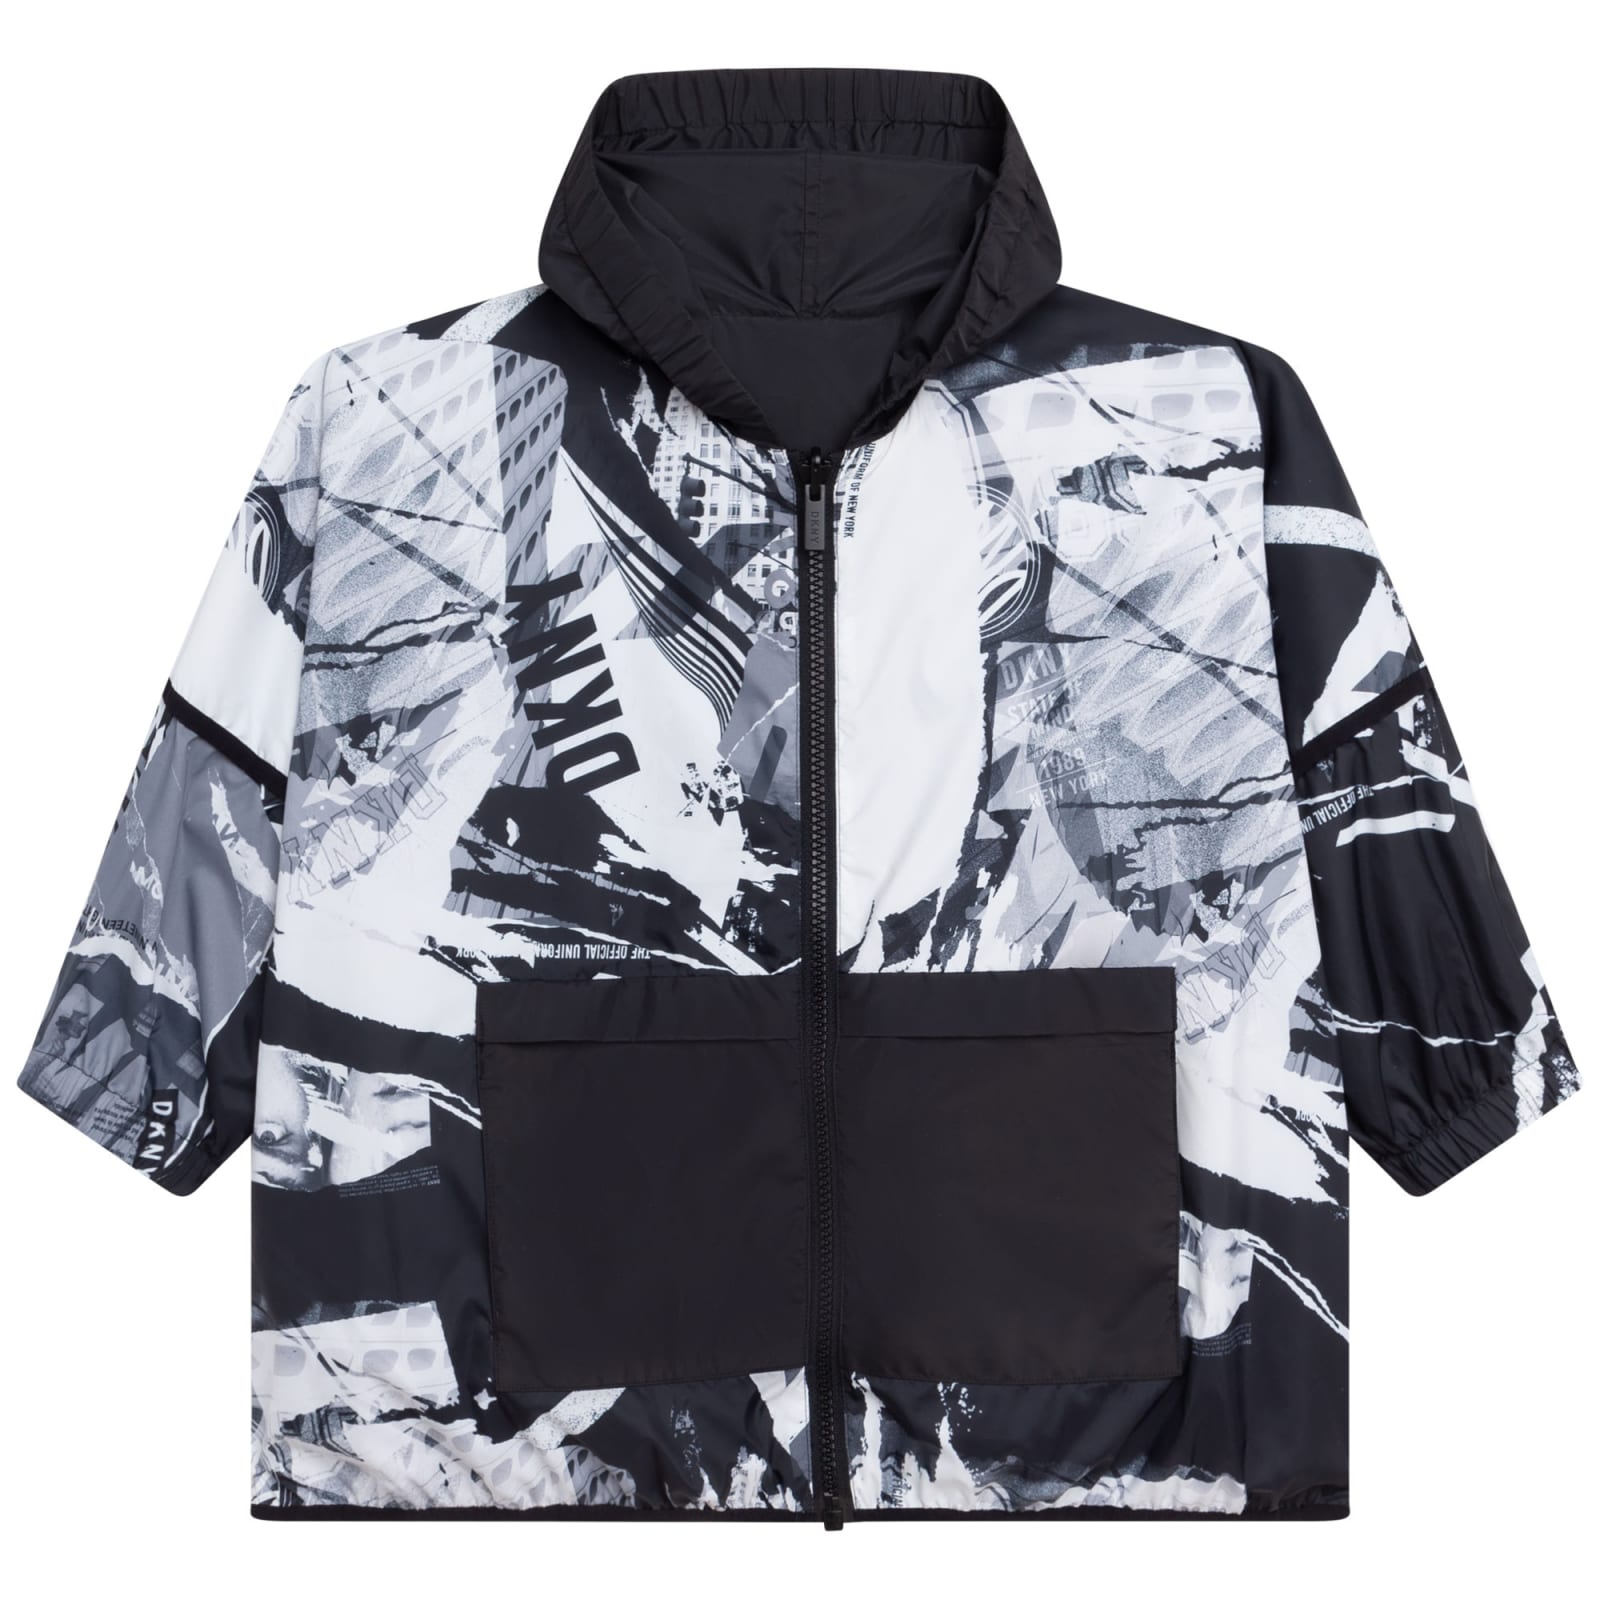 DKNY Reversible Jacket With Print